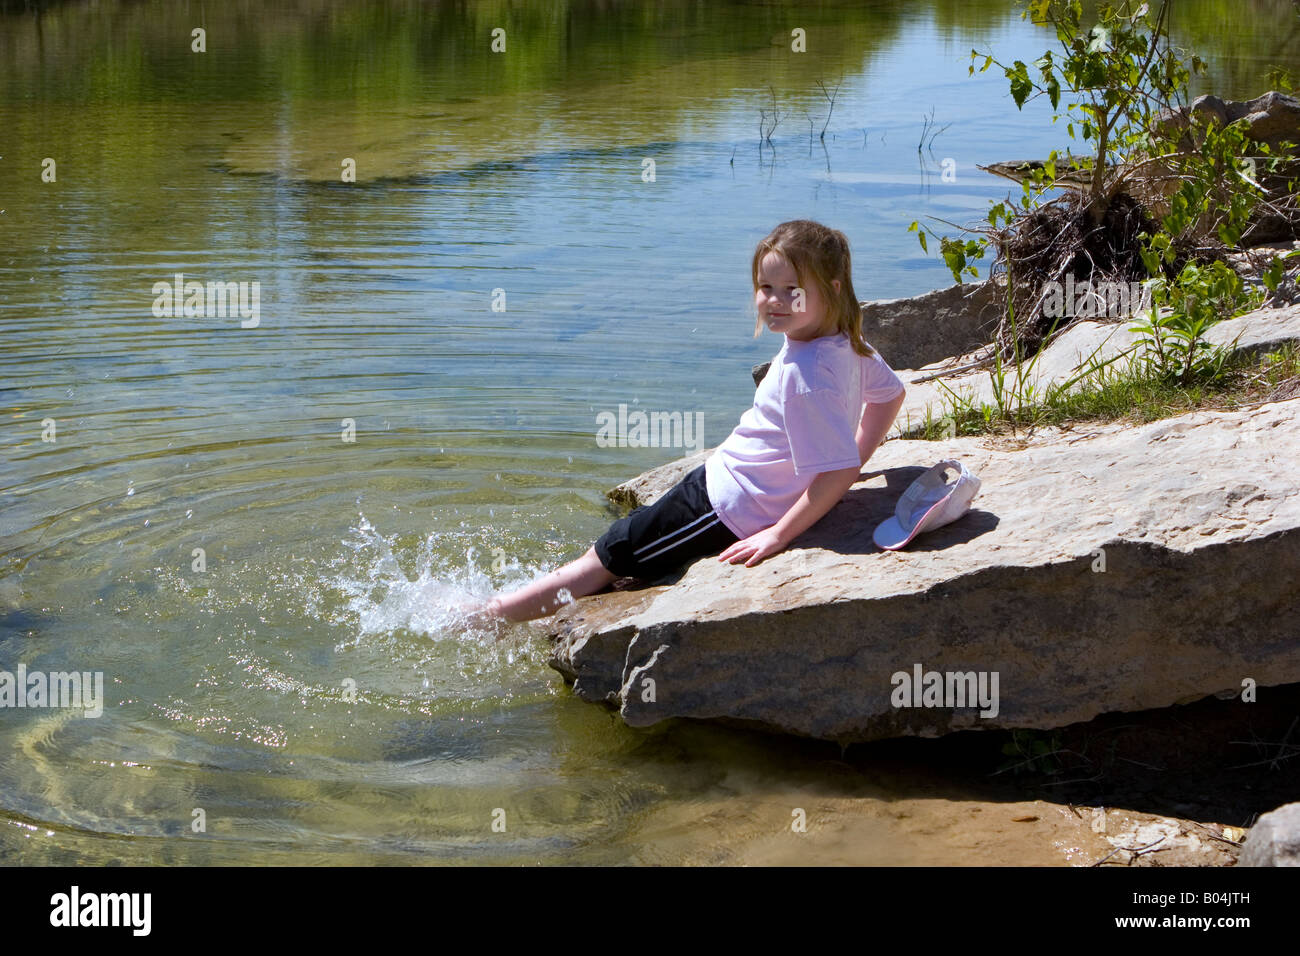 Young girl splashes in river and enjoys the natural Texan landscape. Stock Photo